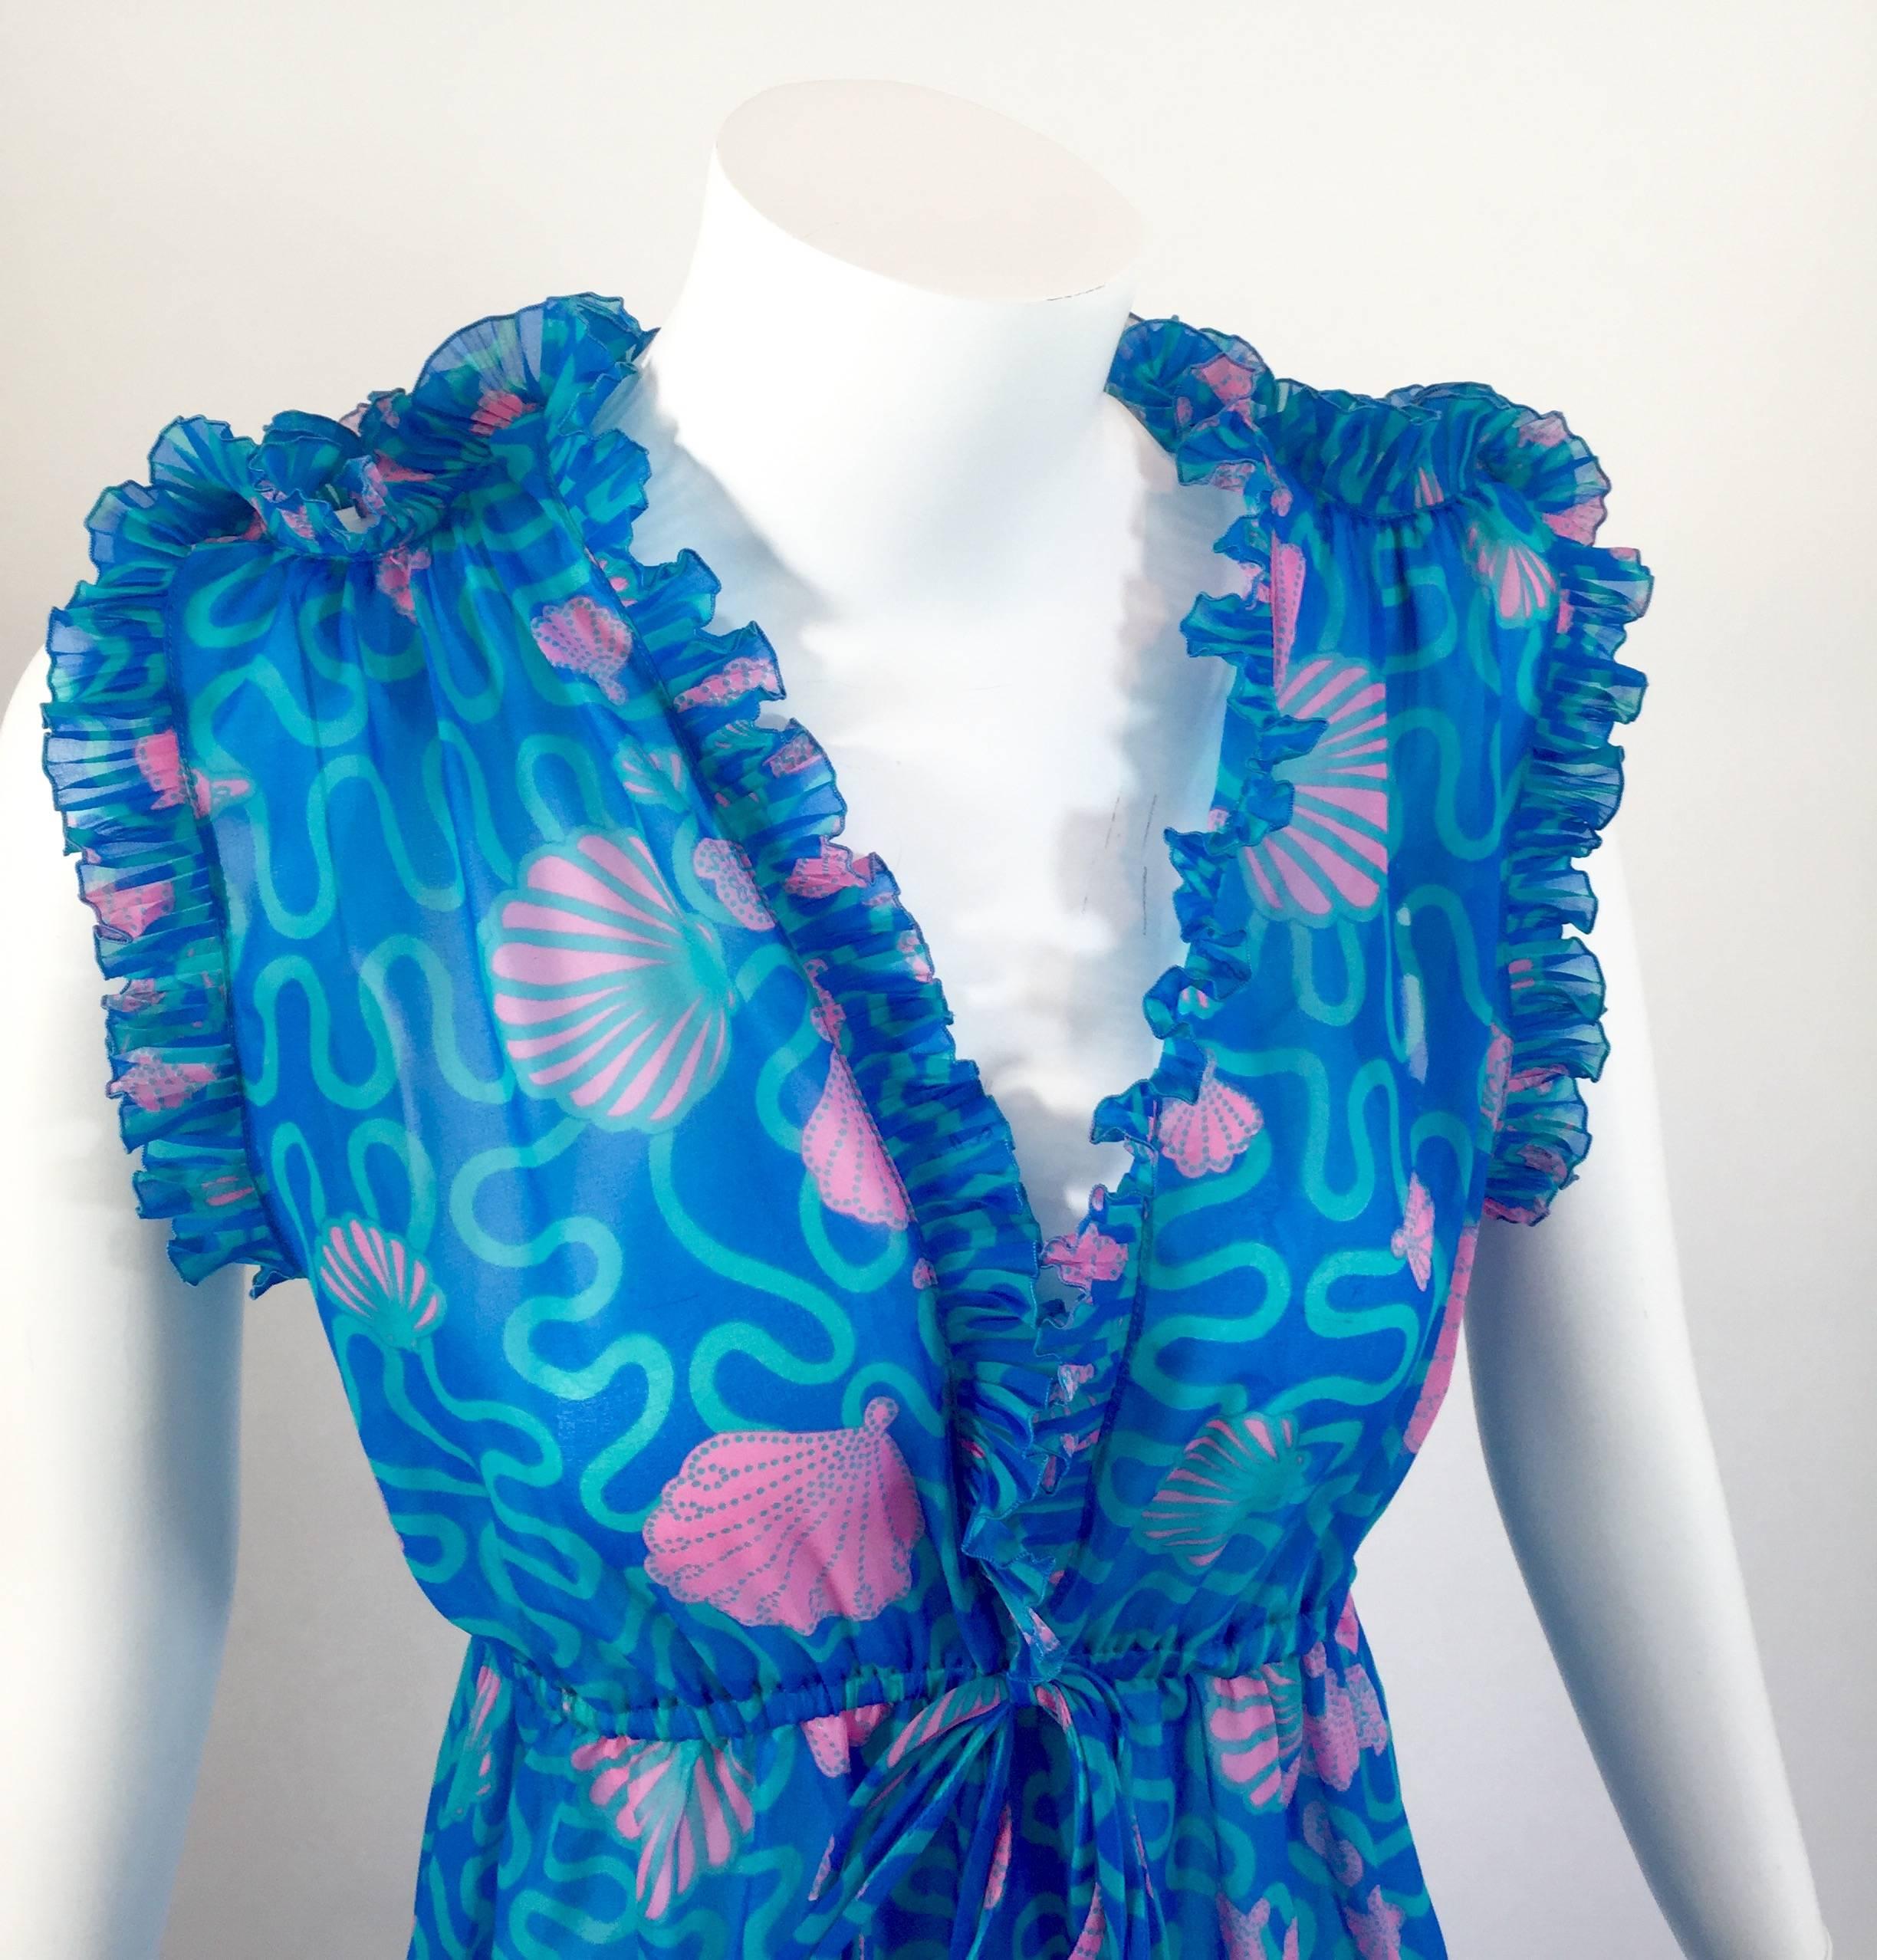 A  breathtaking vintage Zandra Rhodes signed seashell print caftan maxi dress. Done in an airy semi sheer soft and flowing poly chiffon. Featuring a stunning intricately ruffled accordion pleat plunge neckline, with cutouts on the shoulders